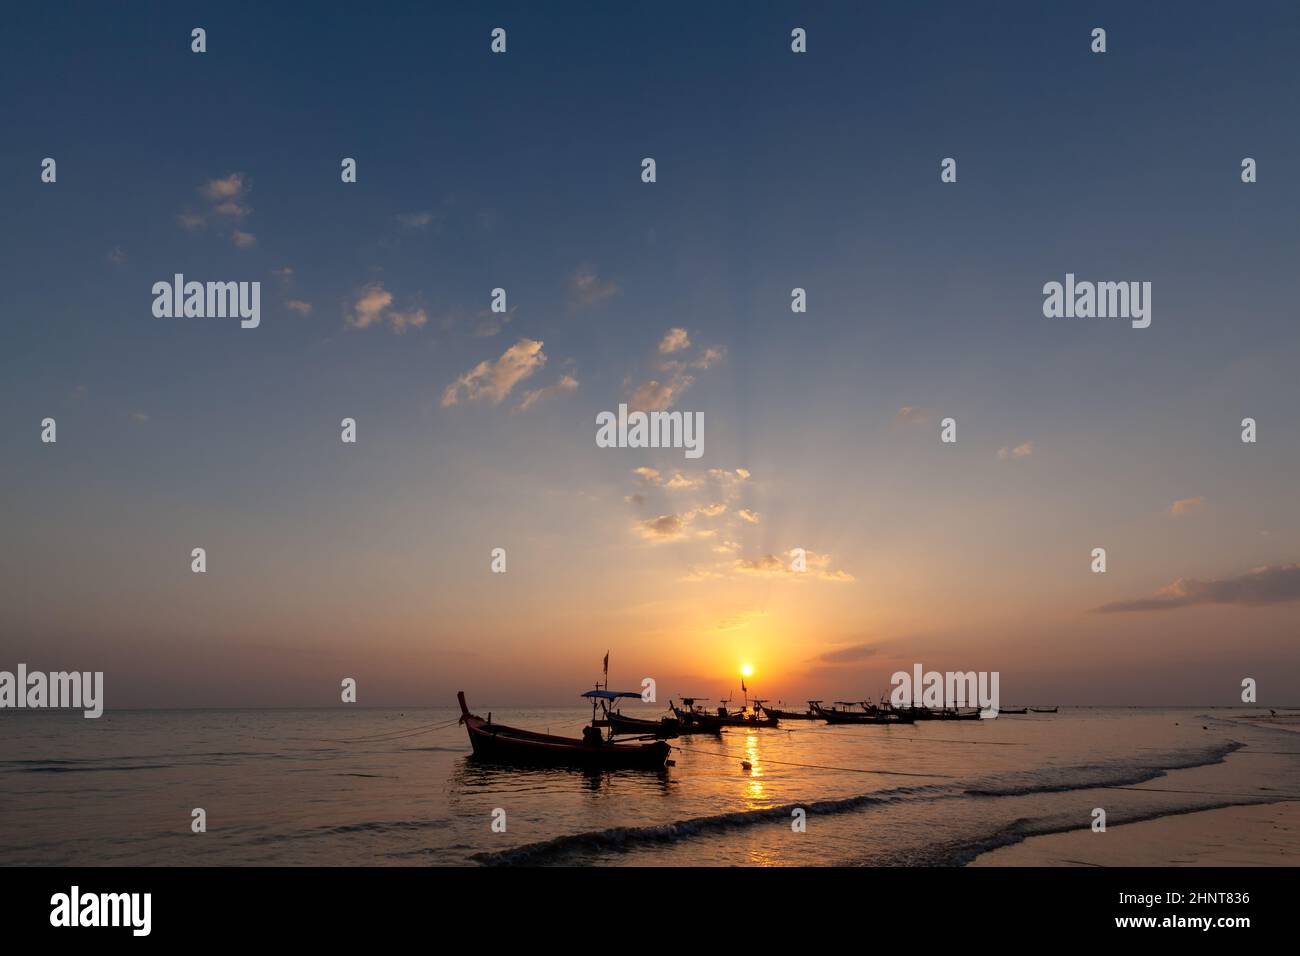 Lanscape of longtail boat in evening time with sunray beam Stock Photo